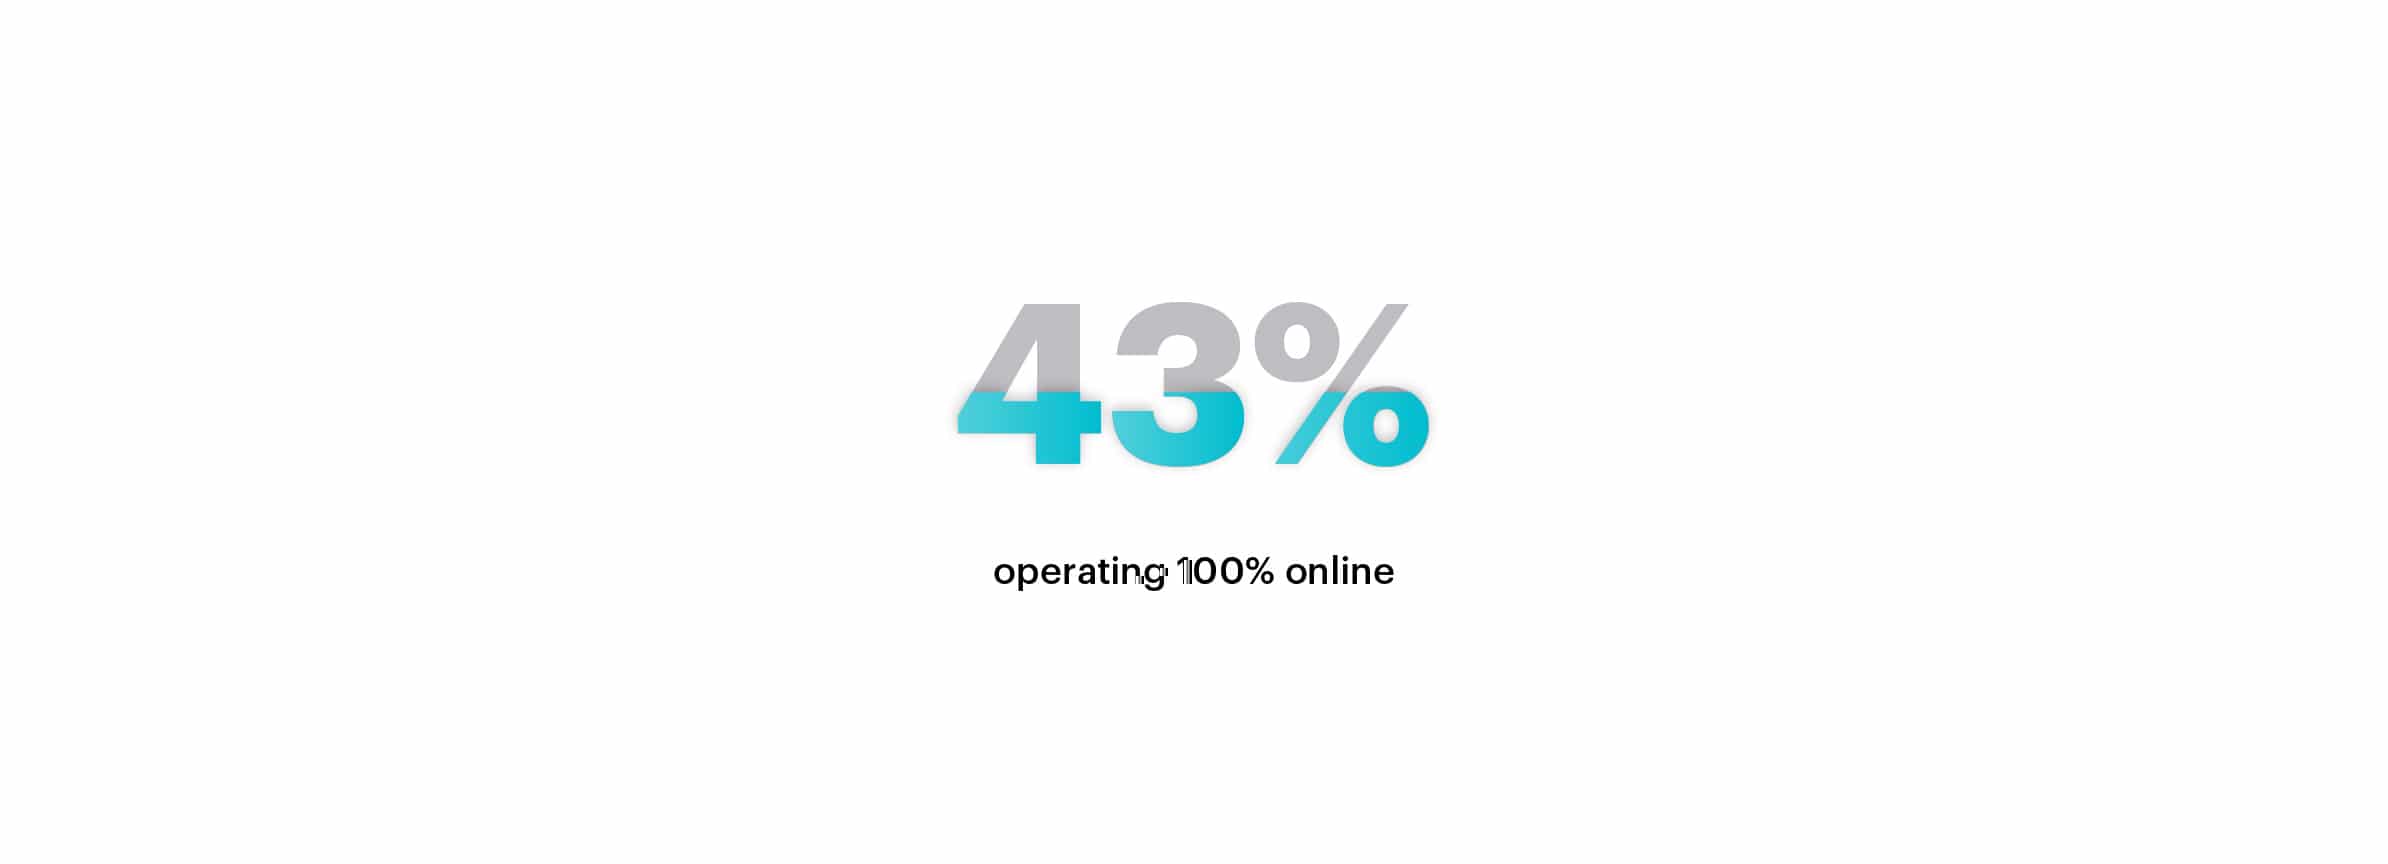 43% of ecommerce shop owners are operating 100% online